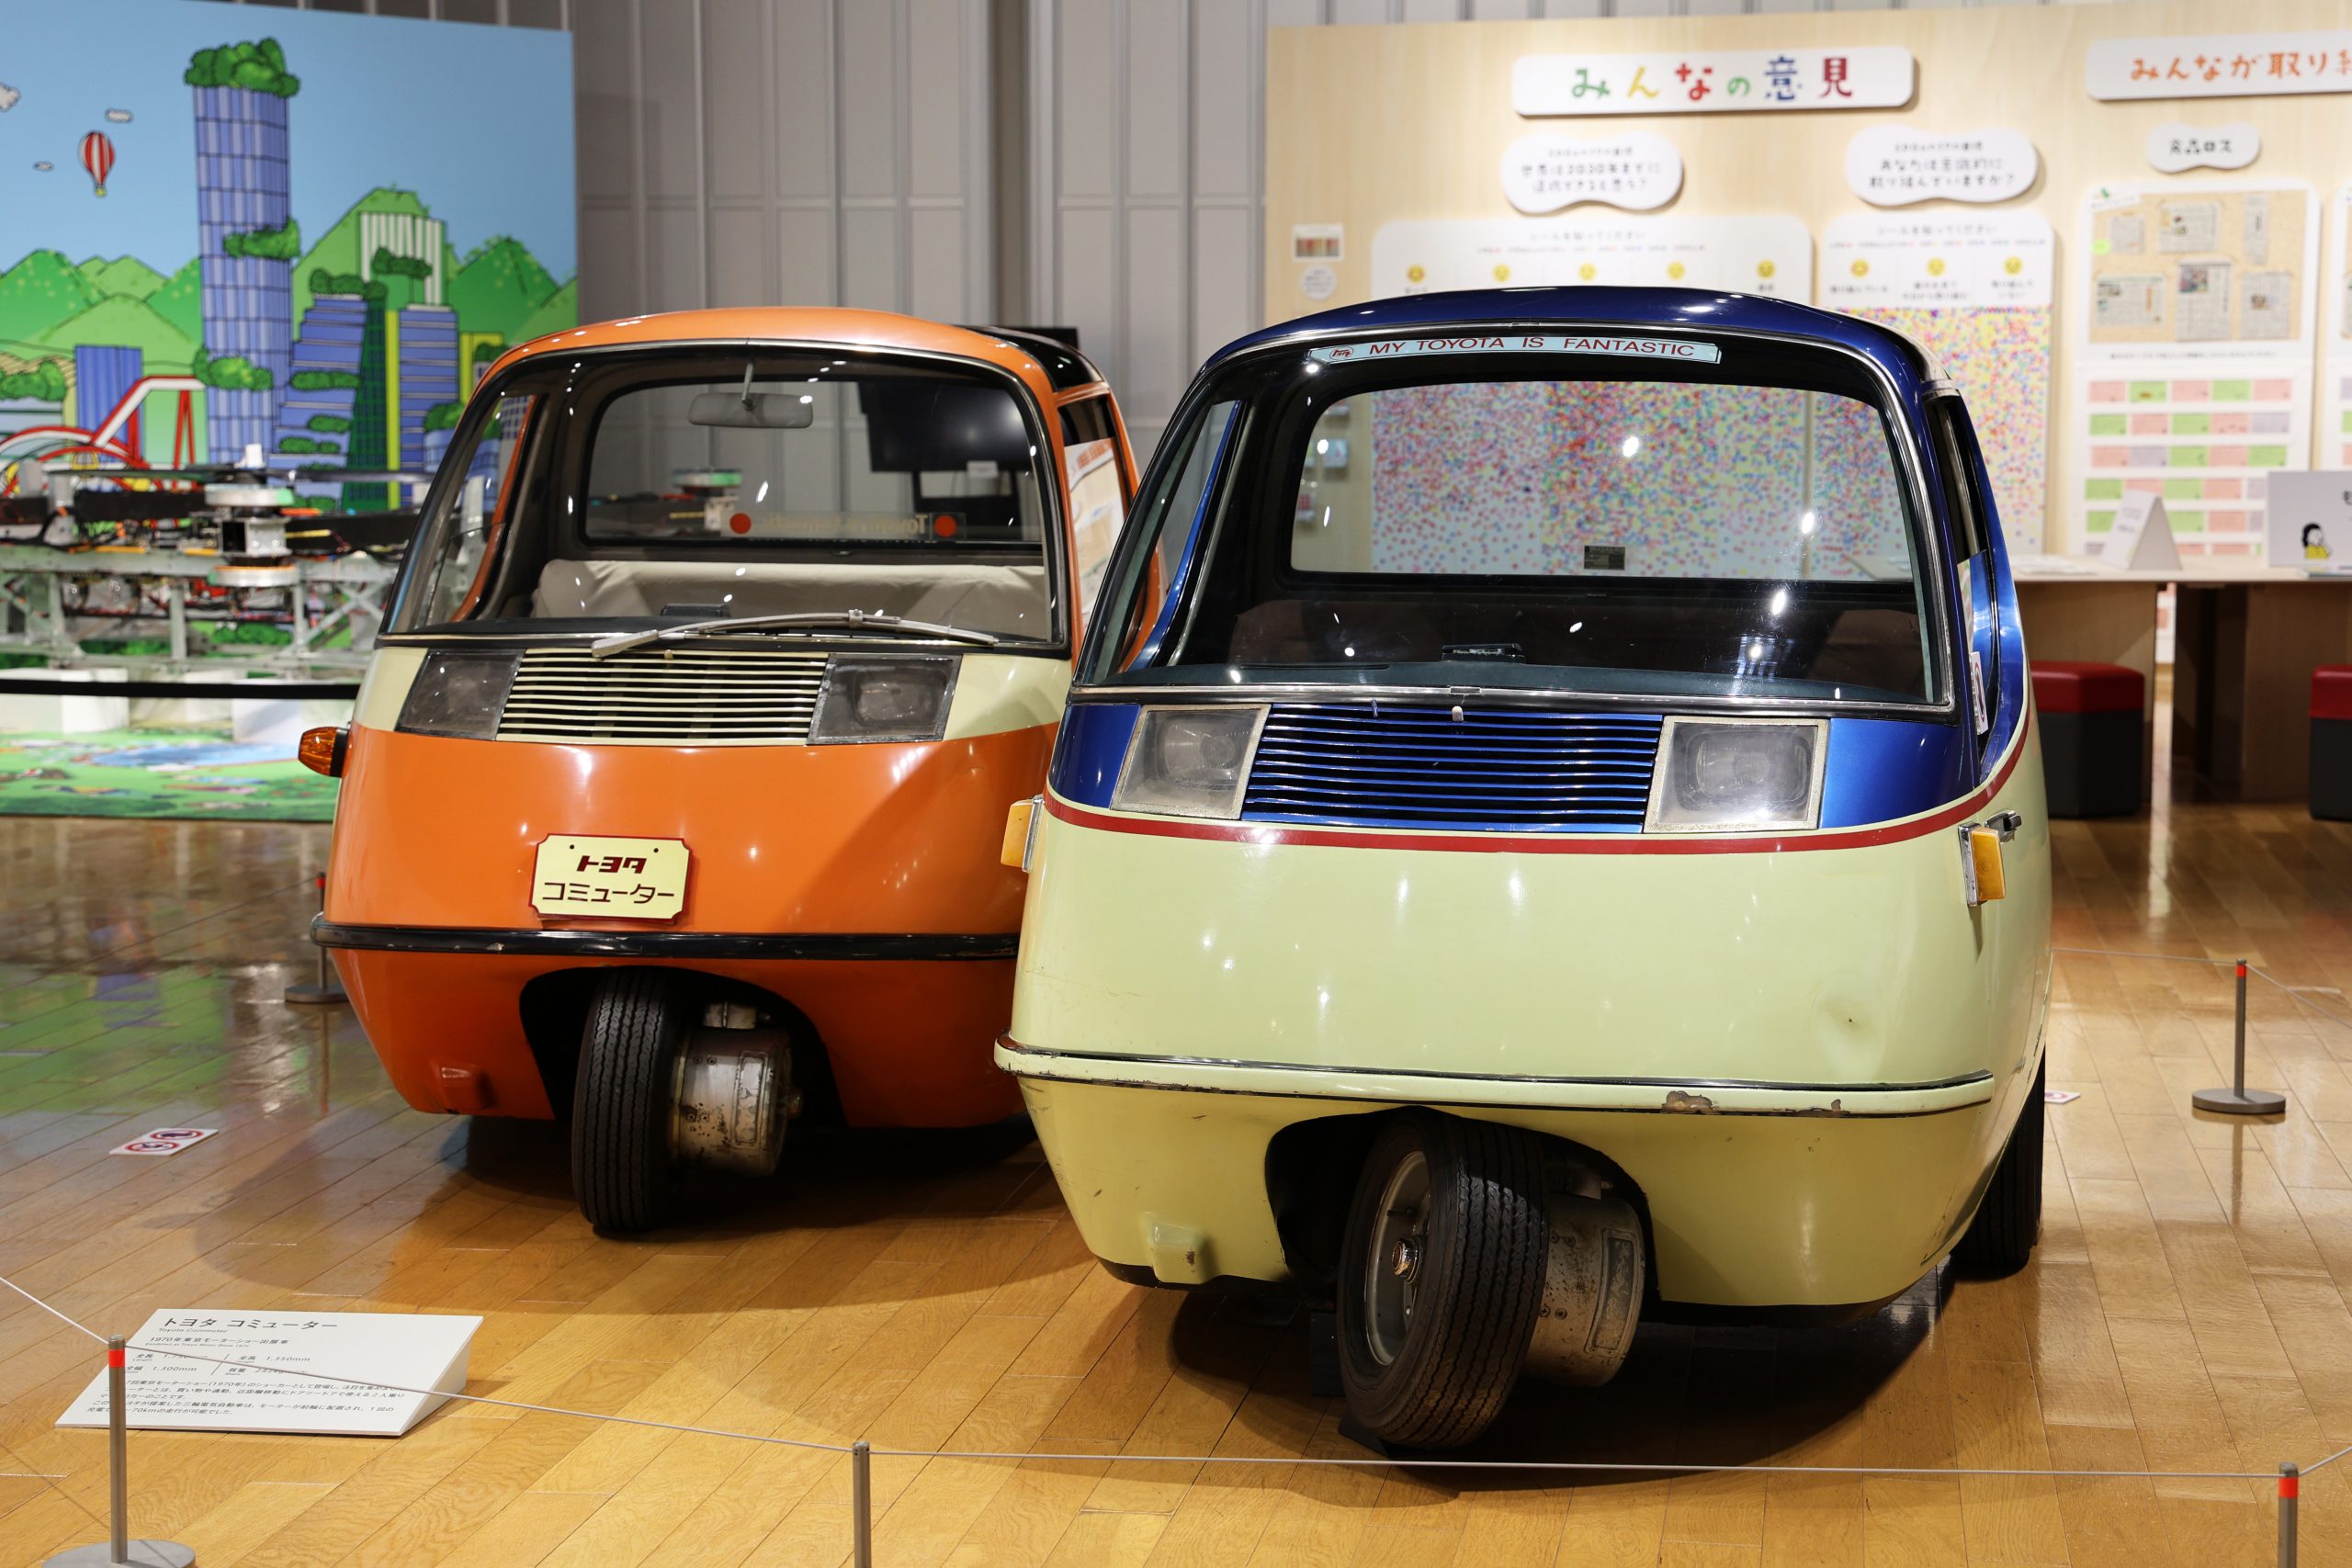 Toyota Commuter (Exhibited at Tokyo Motor Show 1970) [The vehicle on the right is in the collection of Aichi Children's World]